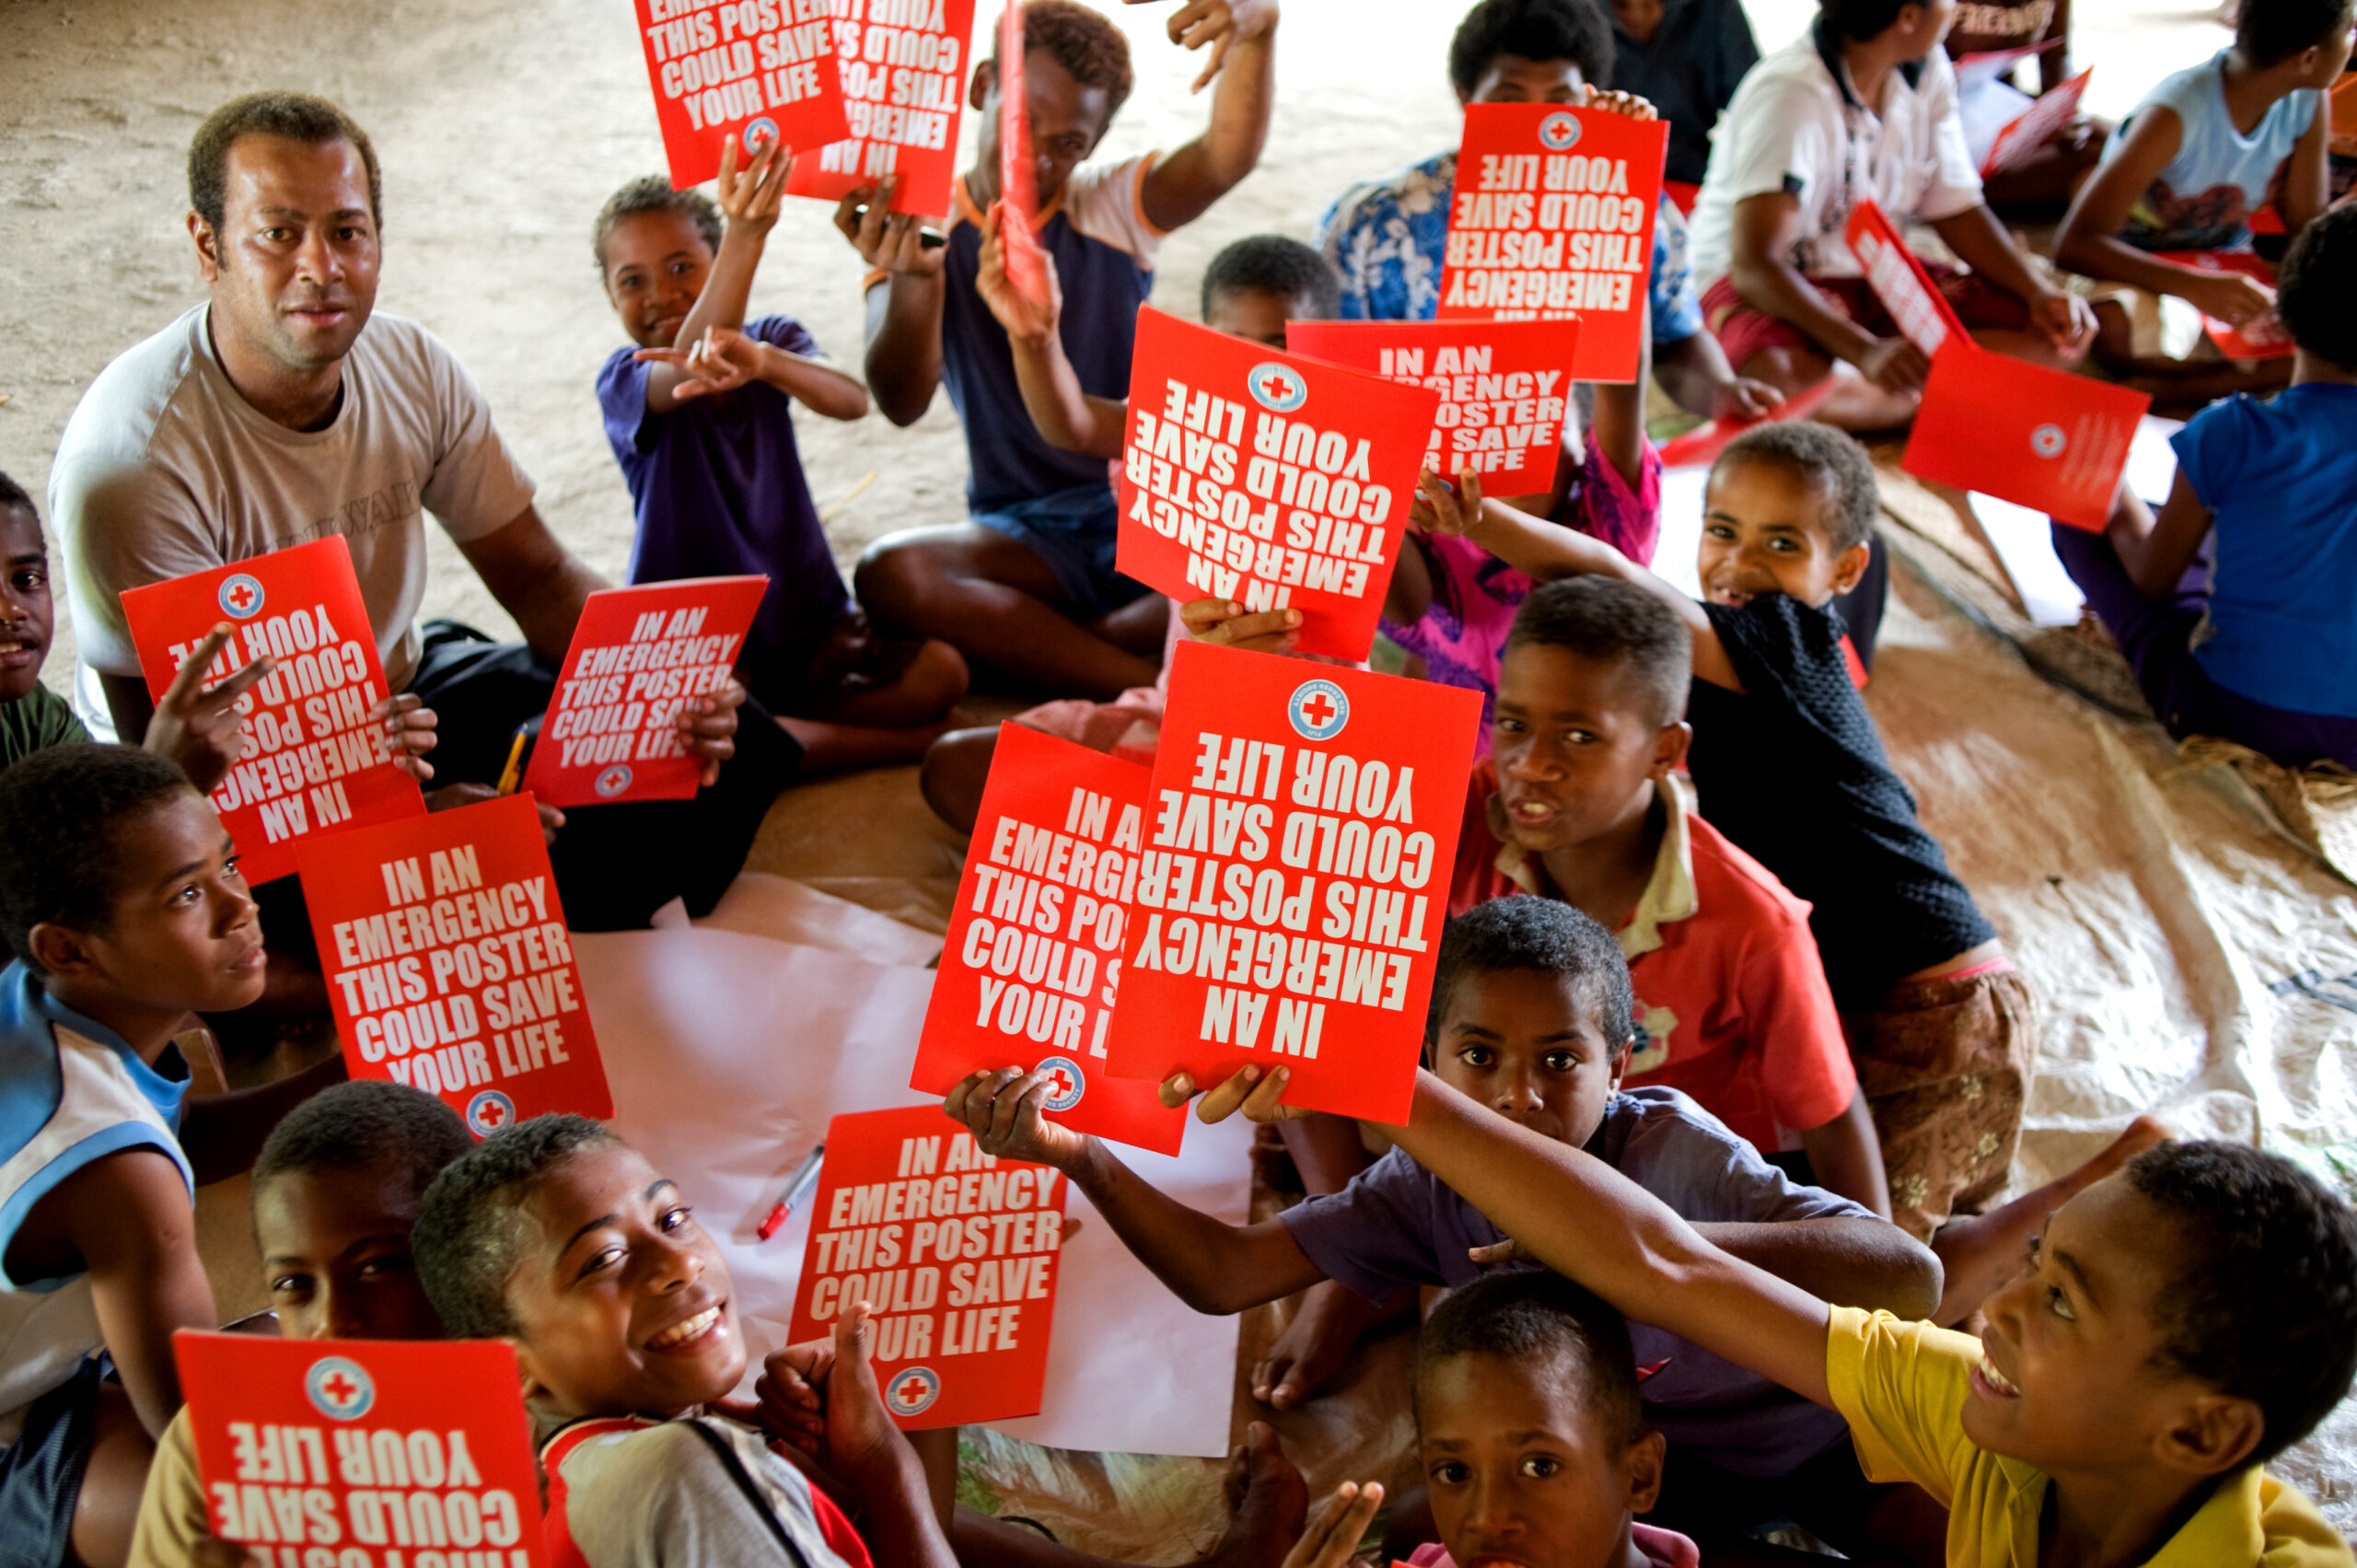 A large group of schoolchildren holding red posters with a Red Cross logo stating "In an emergency, this poster could save lives."